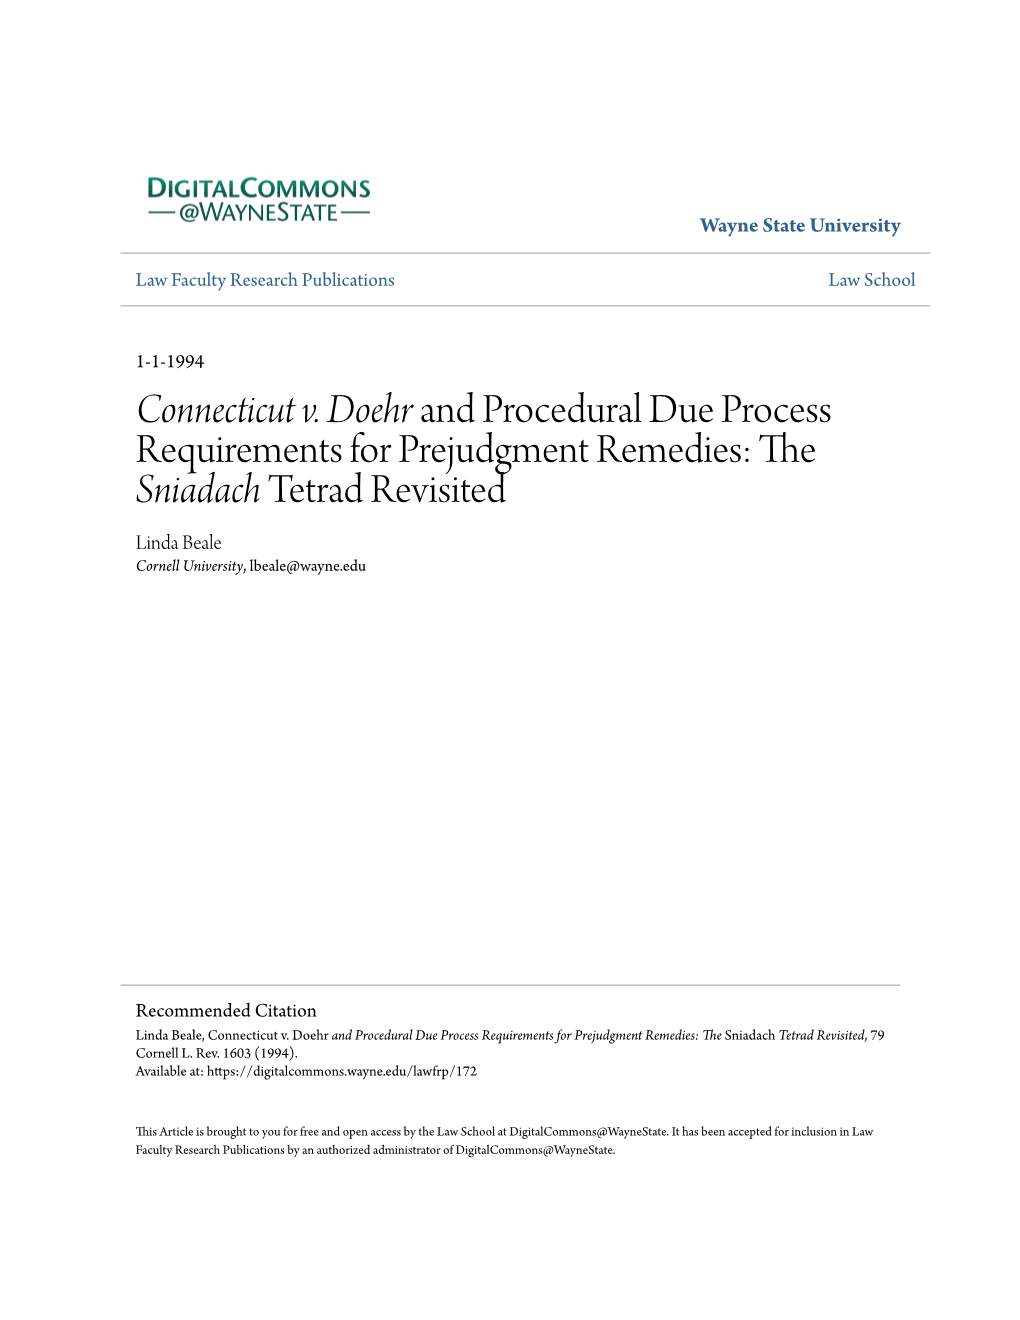 Connecticut V. Doehr and Procedural Due Process Requirements for Prejudgment Remedies: the Sniadach Tetrad Revisited Linda Beale Cornell University, Lbeale@Wayne.Edu